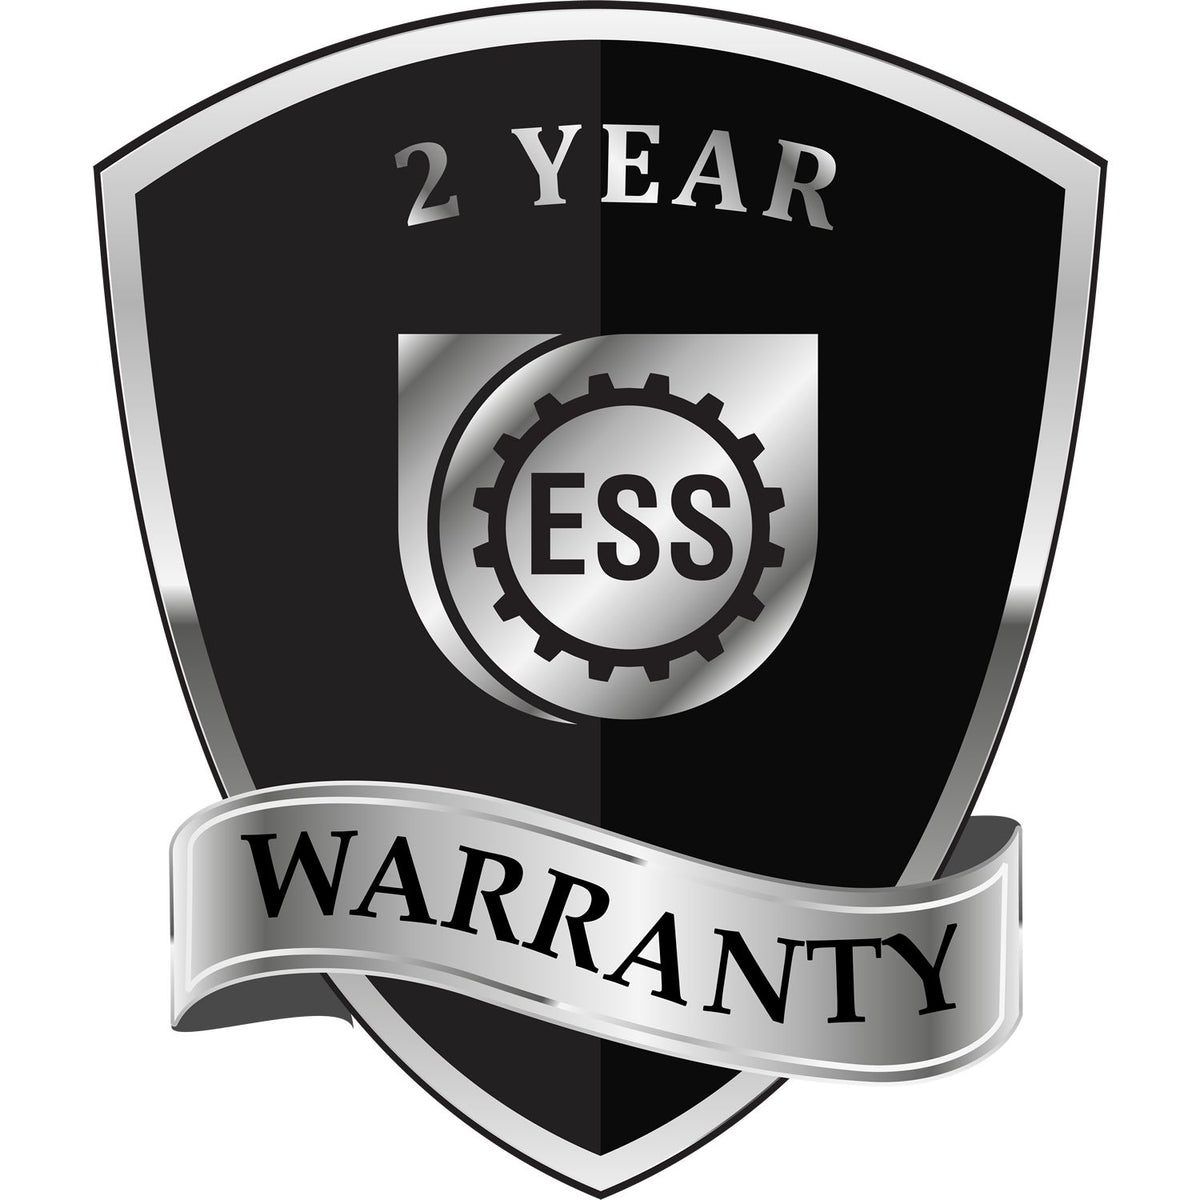 A badge or emblem showing a warranty icon for the State of Arizona Extended Long Reach Engineer Seal